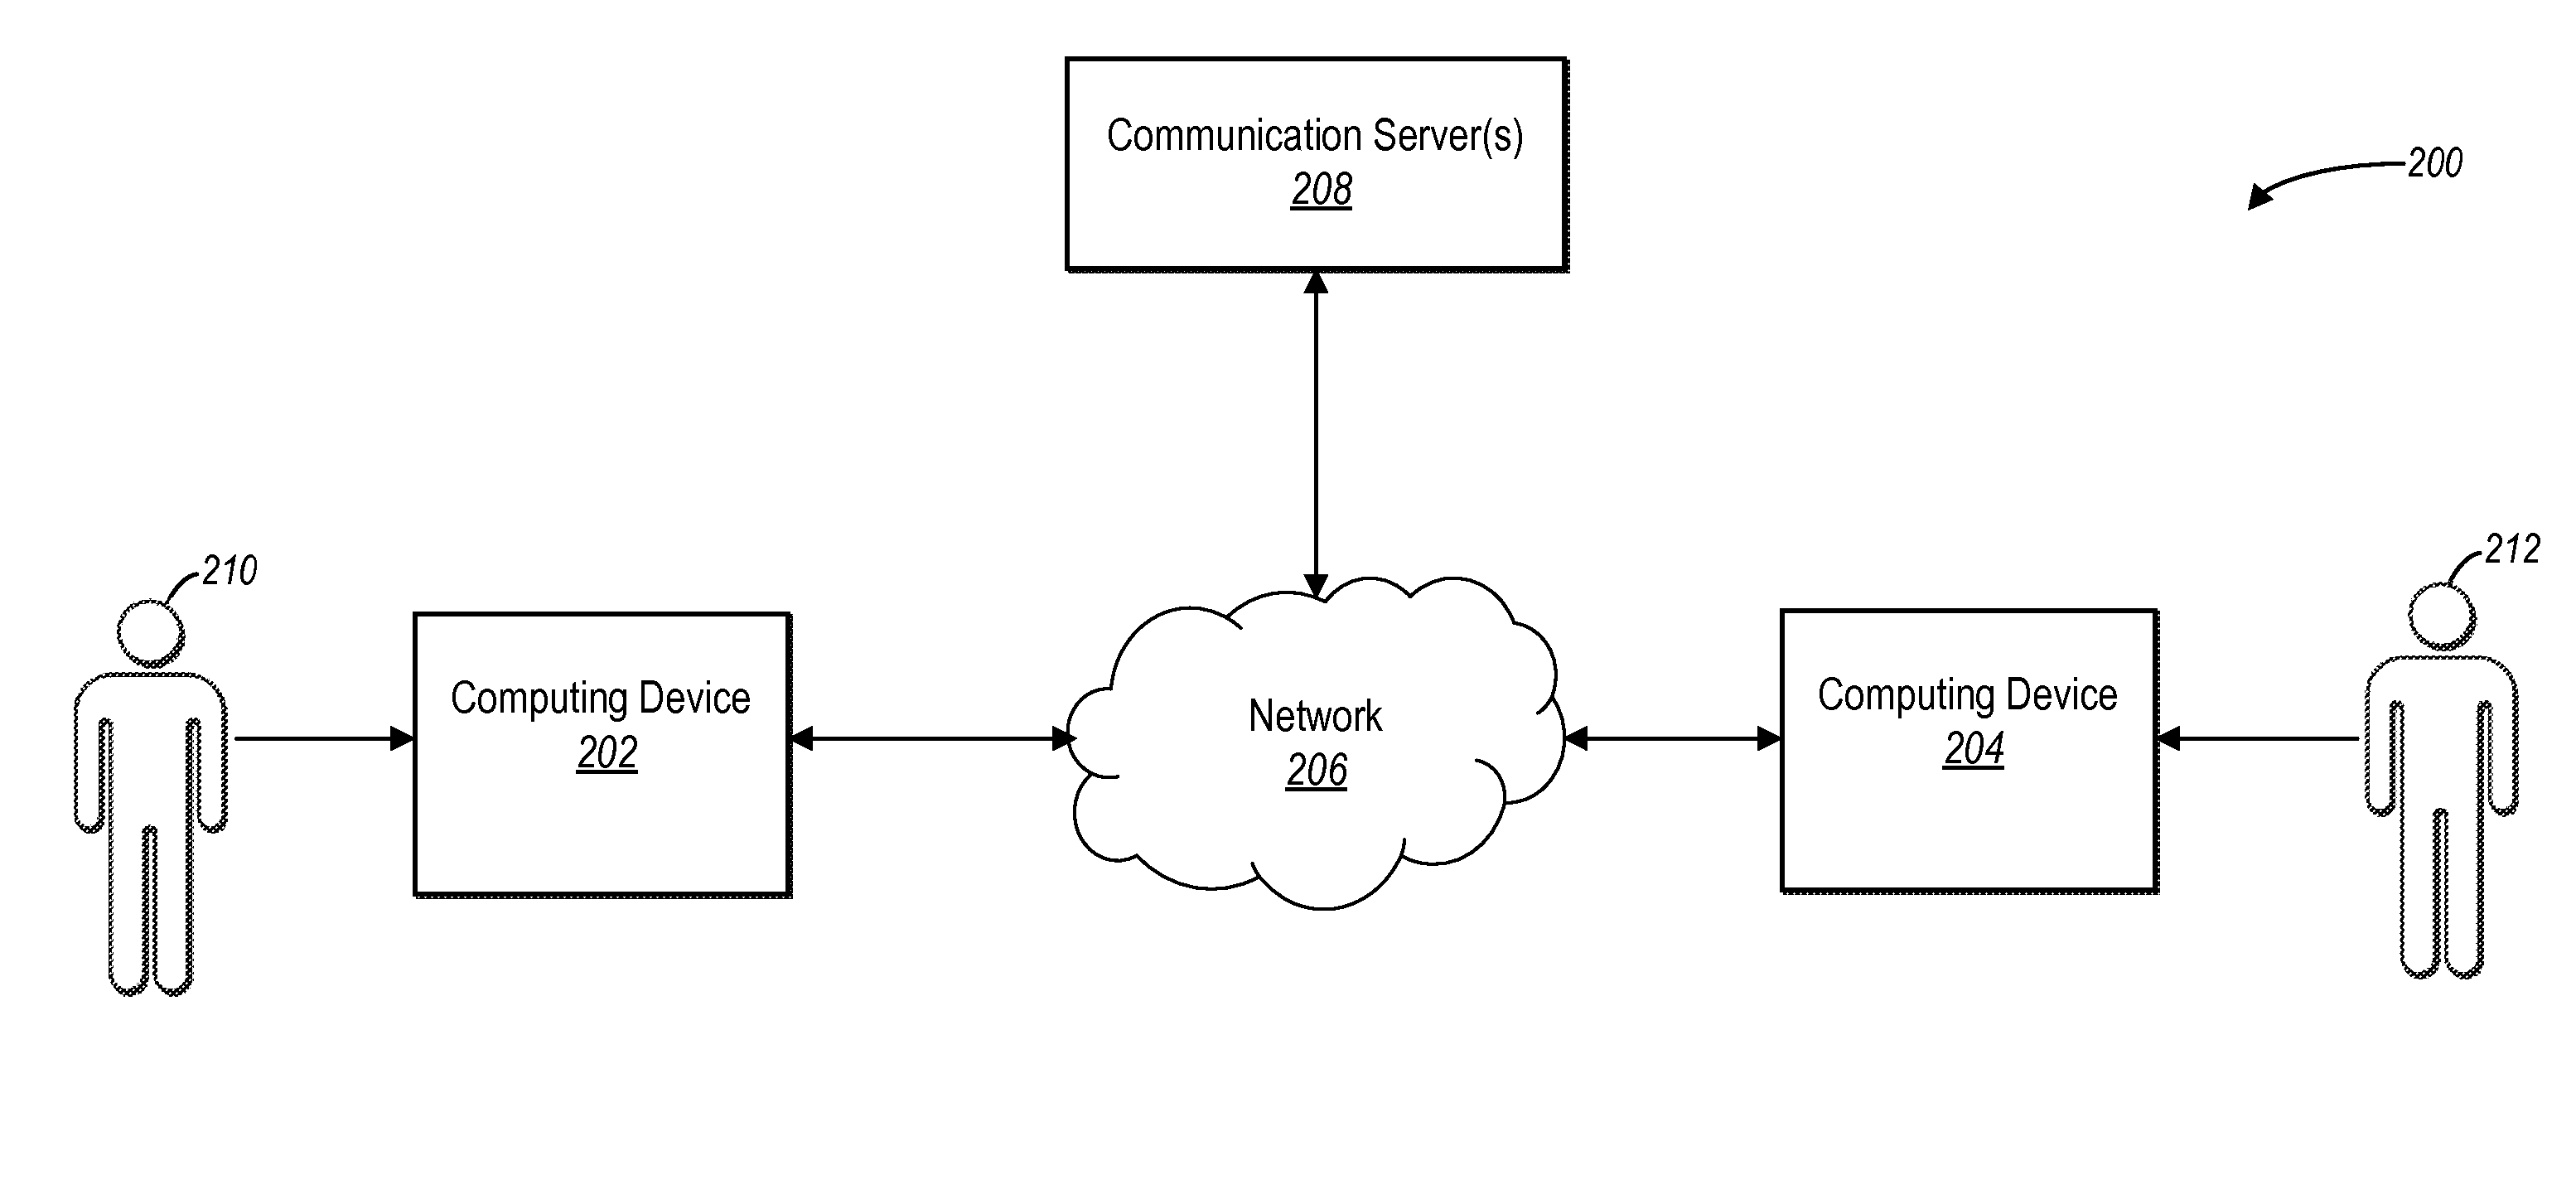 Composing messages within a communication thread